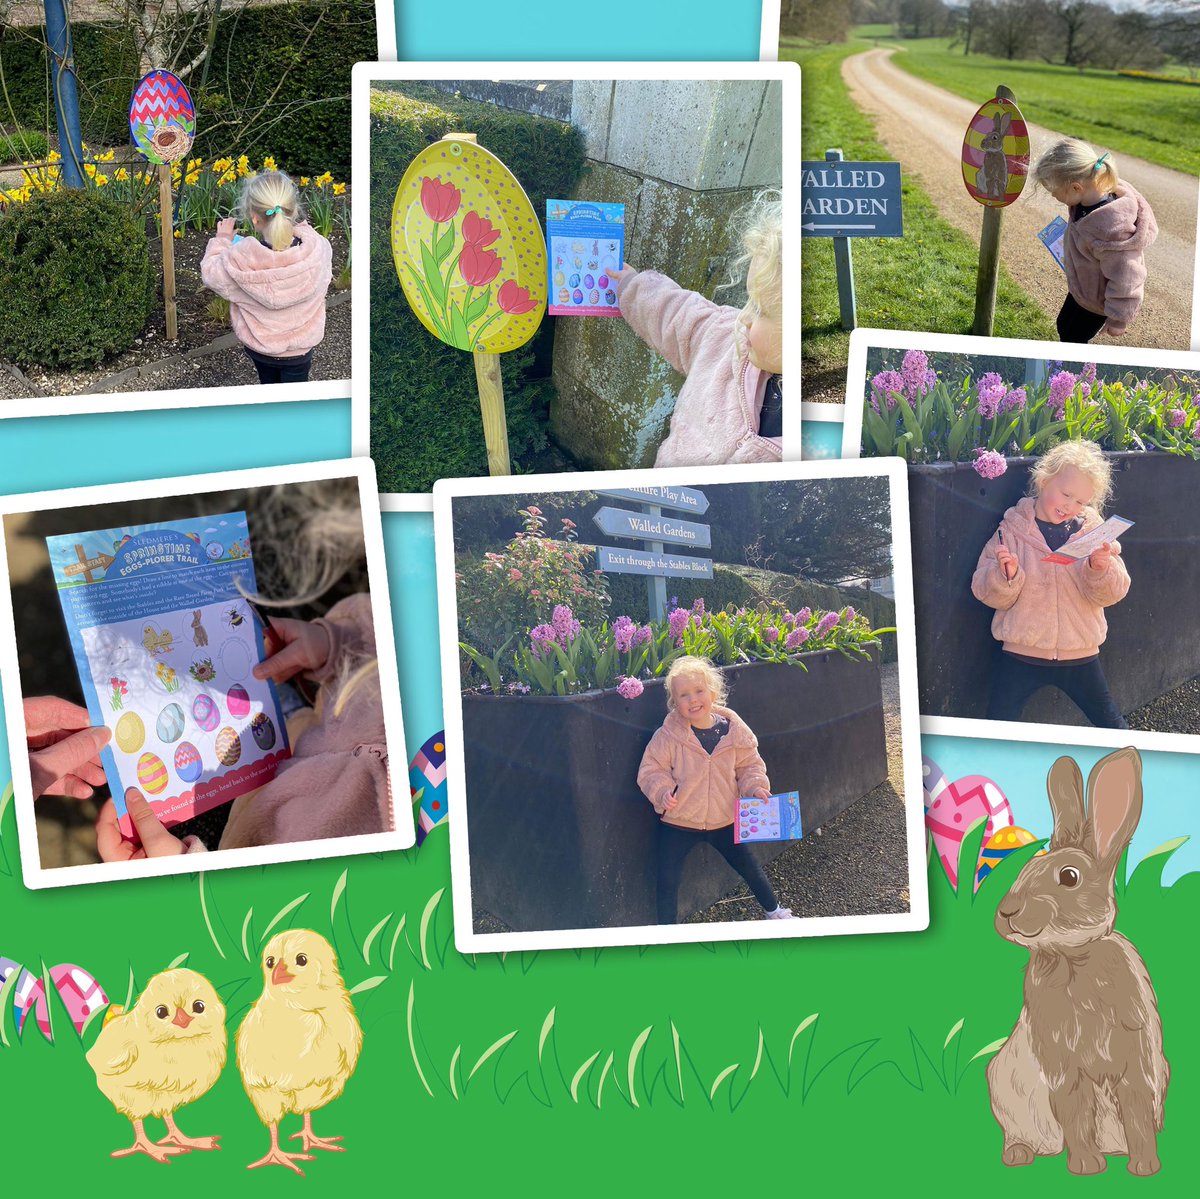 Smile if you’ve had the best day @SledmereHouse! 🐣The Springtime Eggs-Plorer Trail runs until this Sunday, pick up an #Eastertrail and look out for our beautifully #illustrated Easter themed boards, designed and illustrated by the team @colourheroes